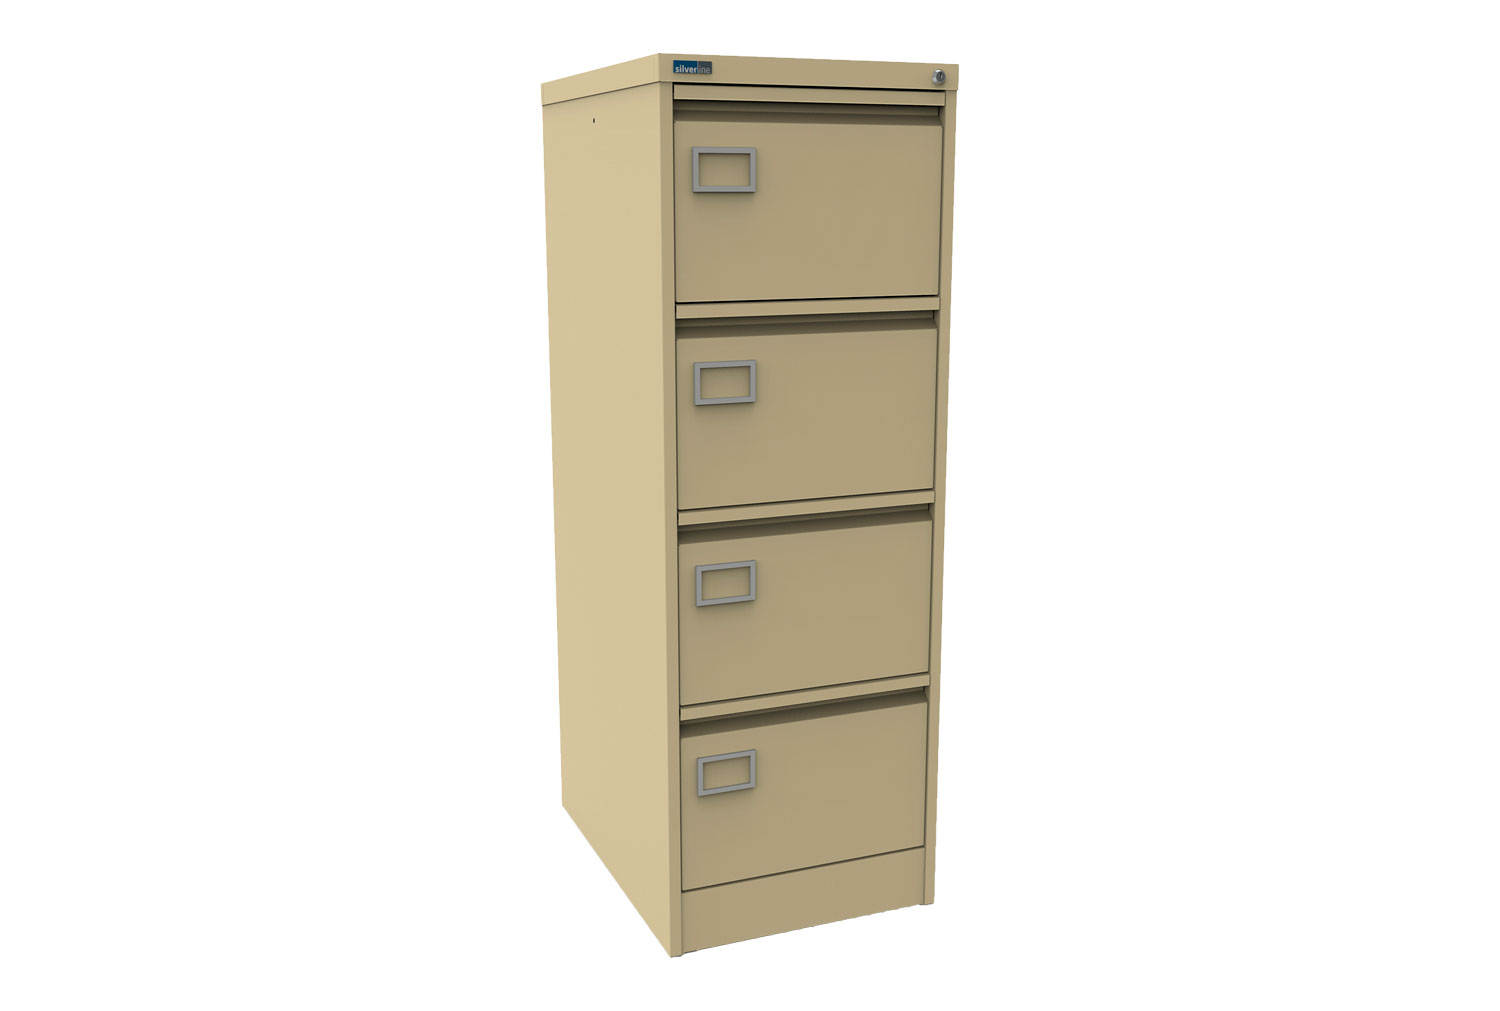 Silverline Executive 4 Drawer Filing Cabinets, 4 Drawer - 40wx62dx132h (cm), Beige